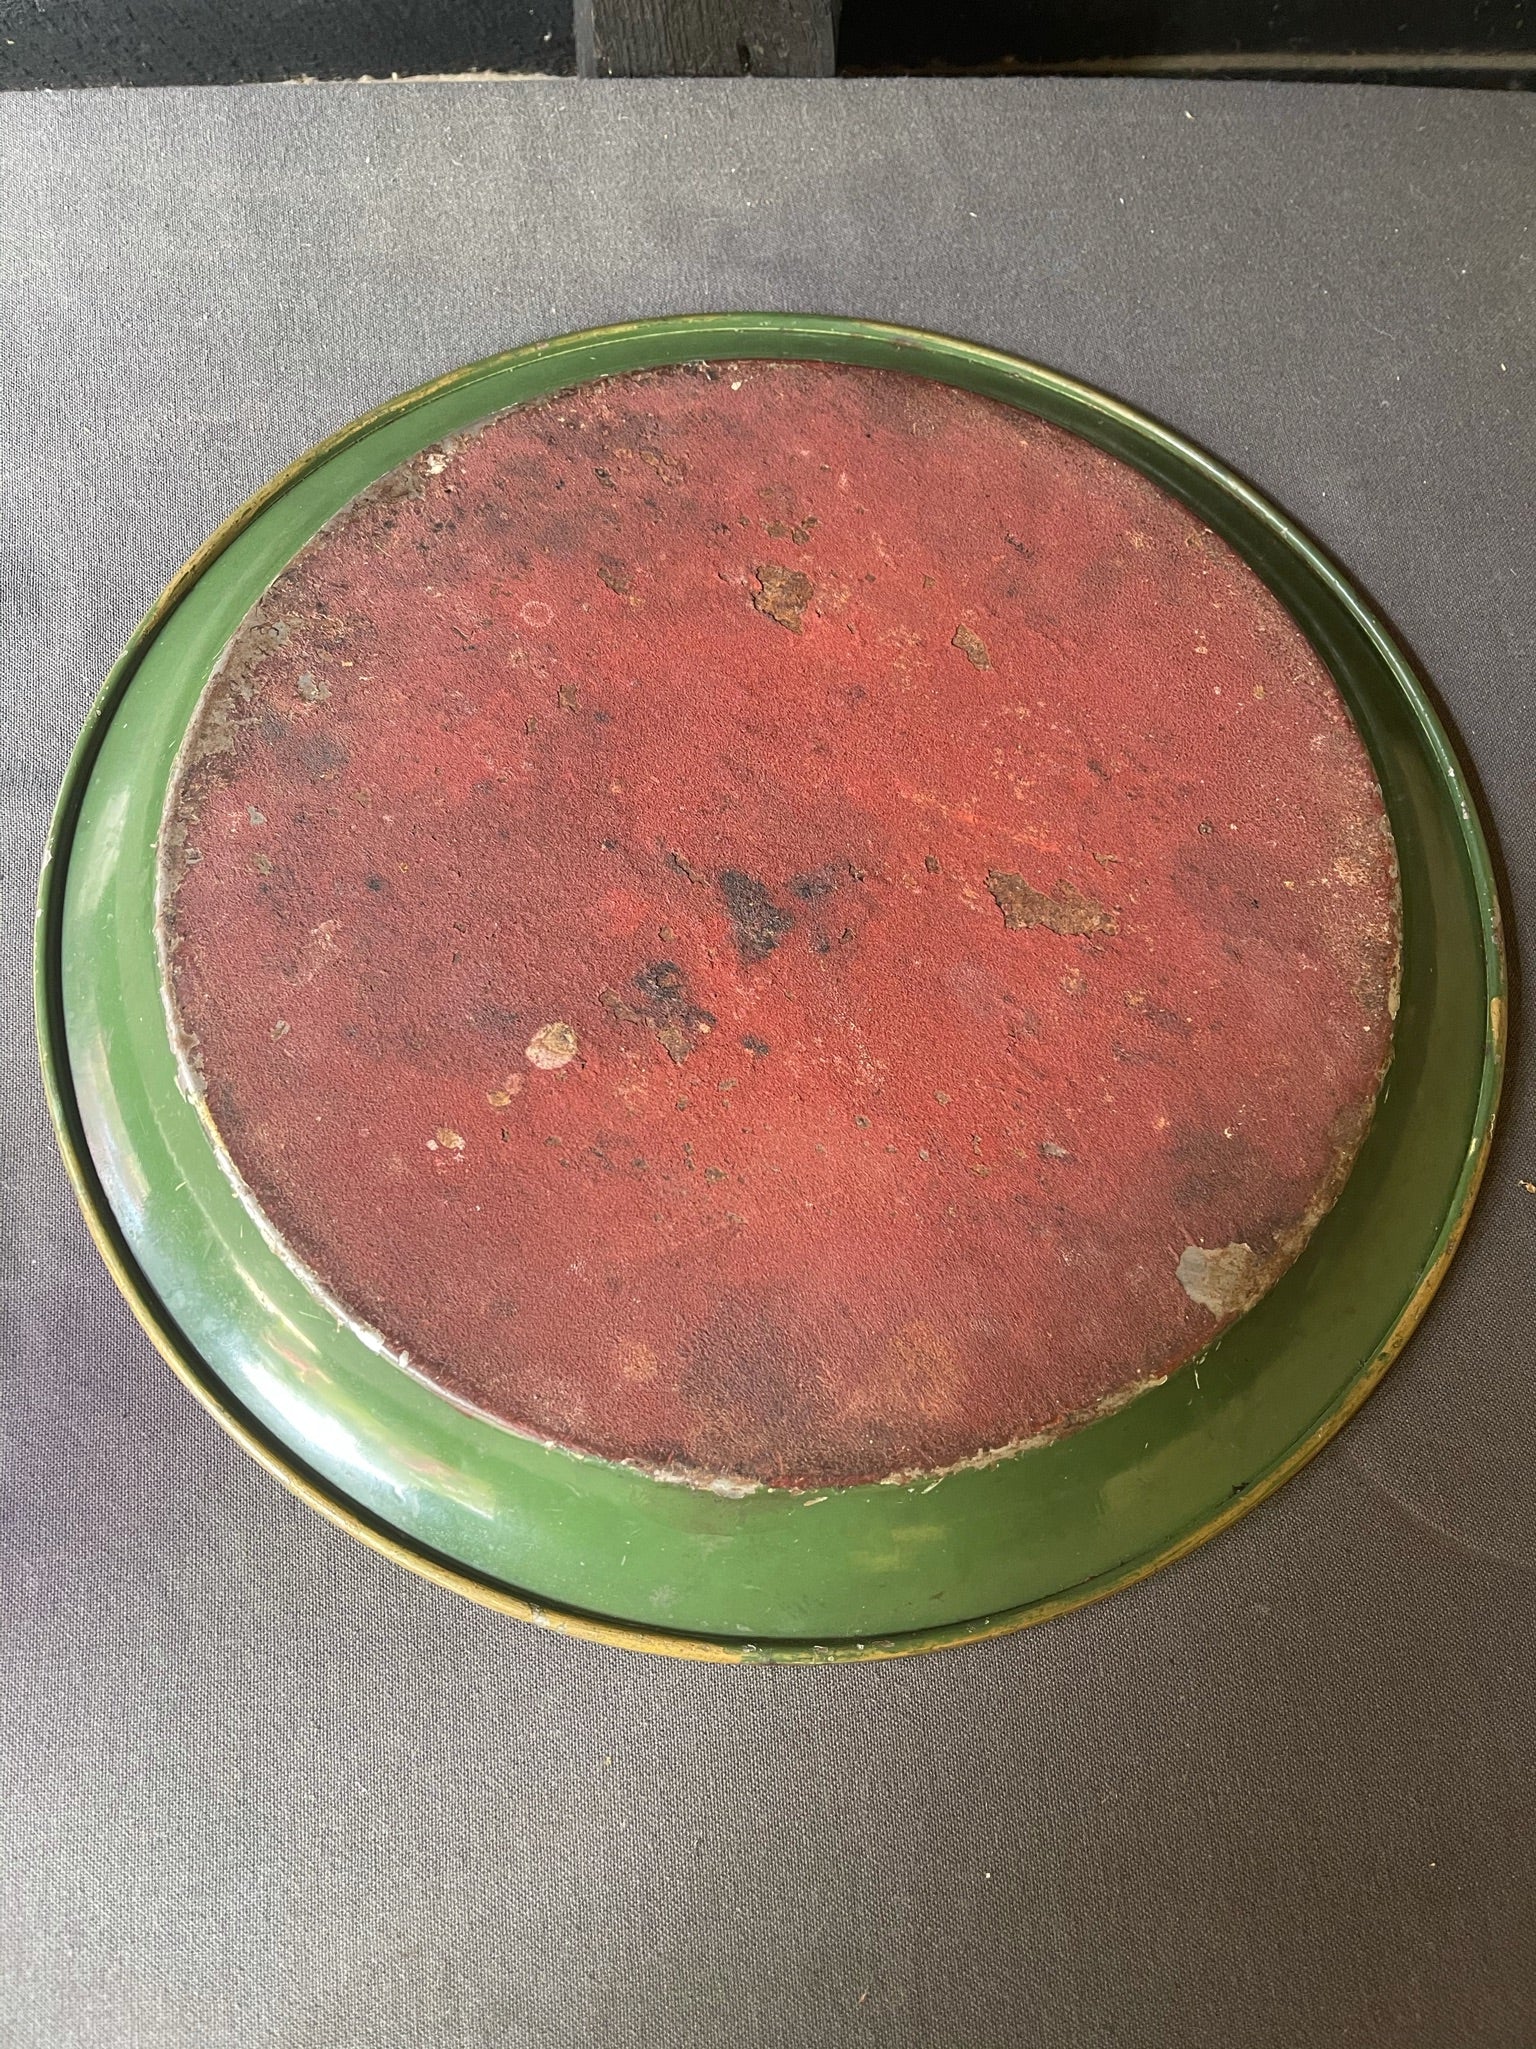 Vintage French Metal Green Toleware Tray